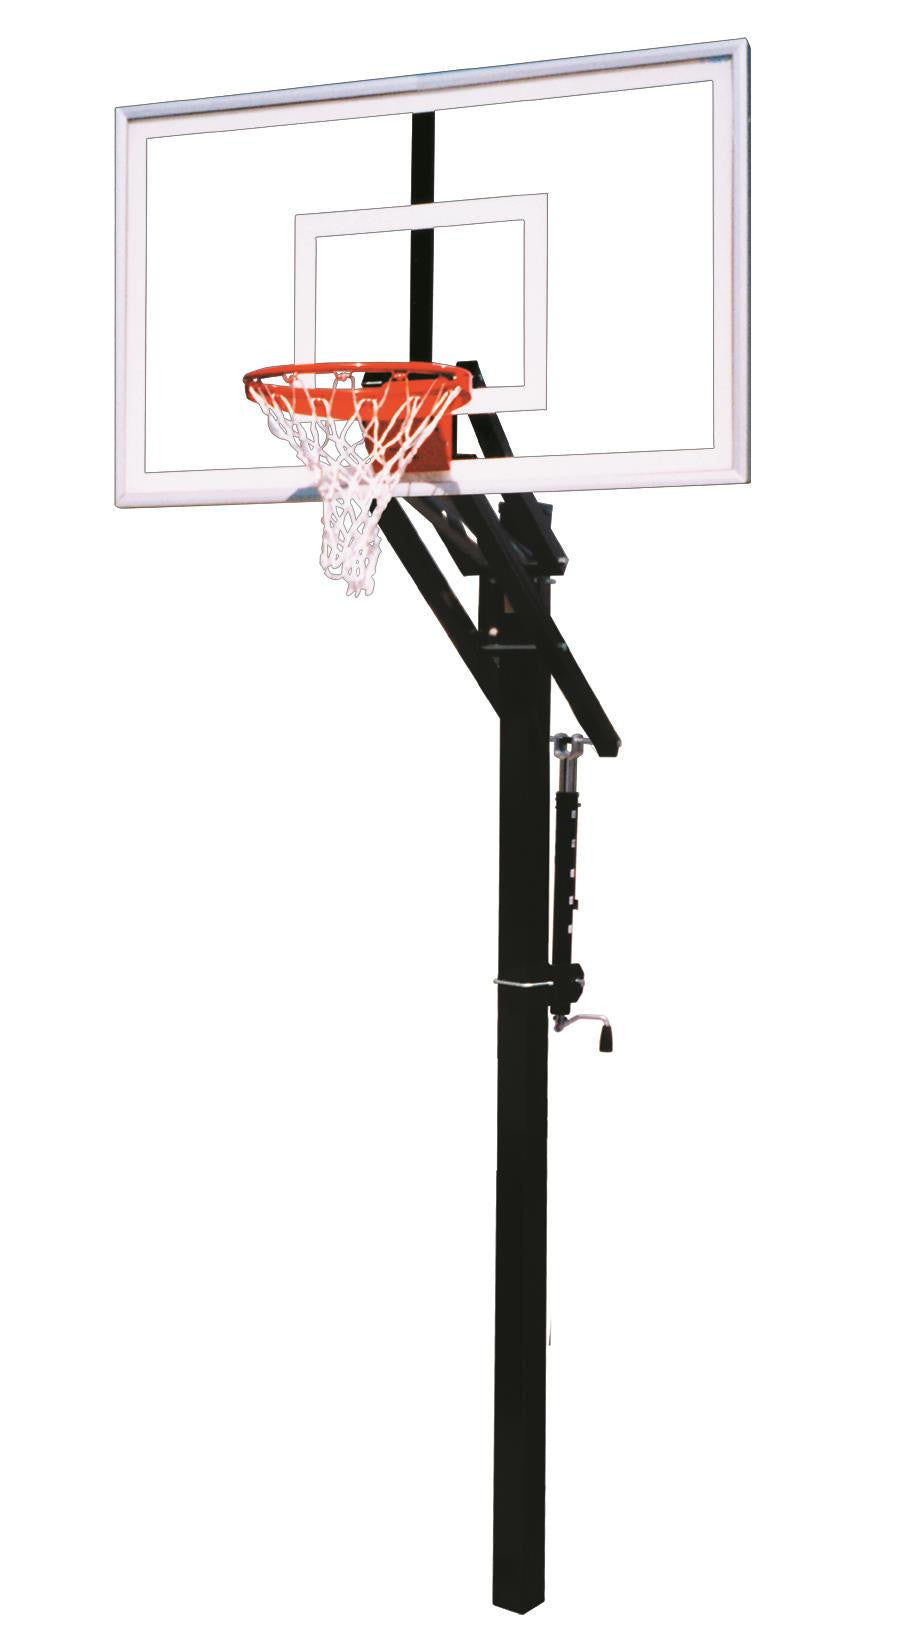 First Team Jam Nitro In Ground Outdoor Adjustable Basketball Hoop 60 inch Tempered Glass